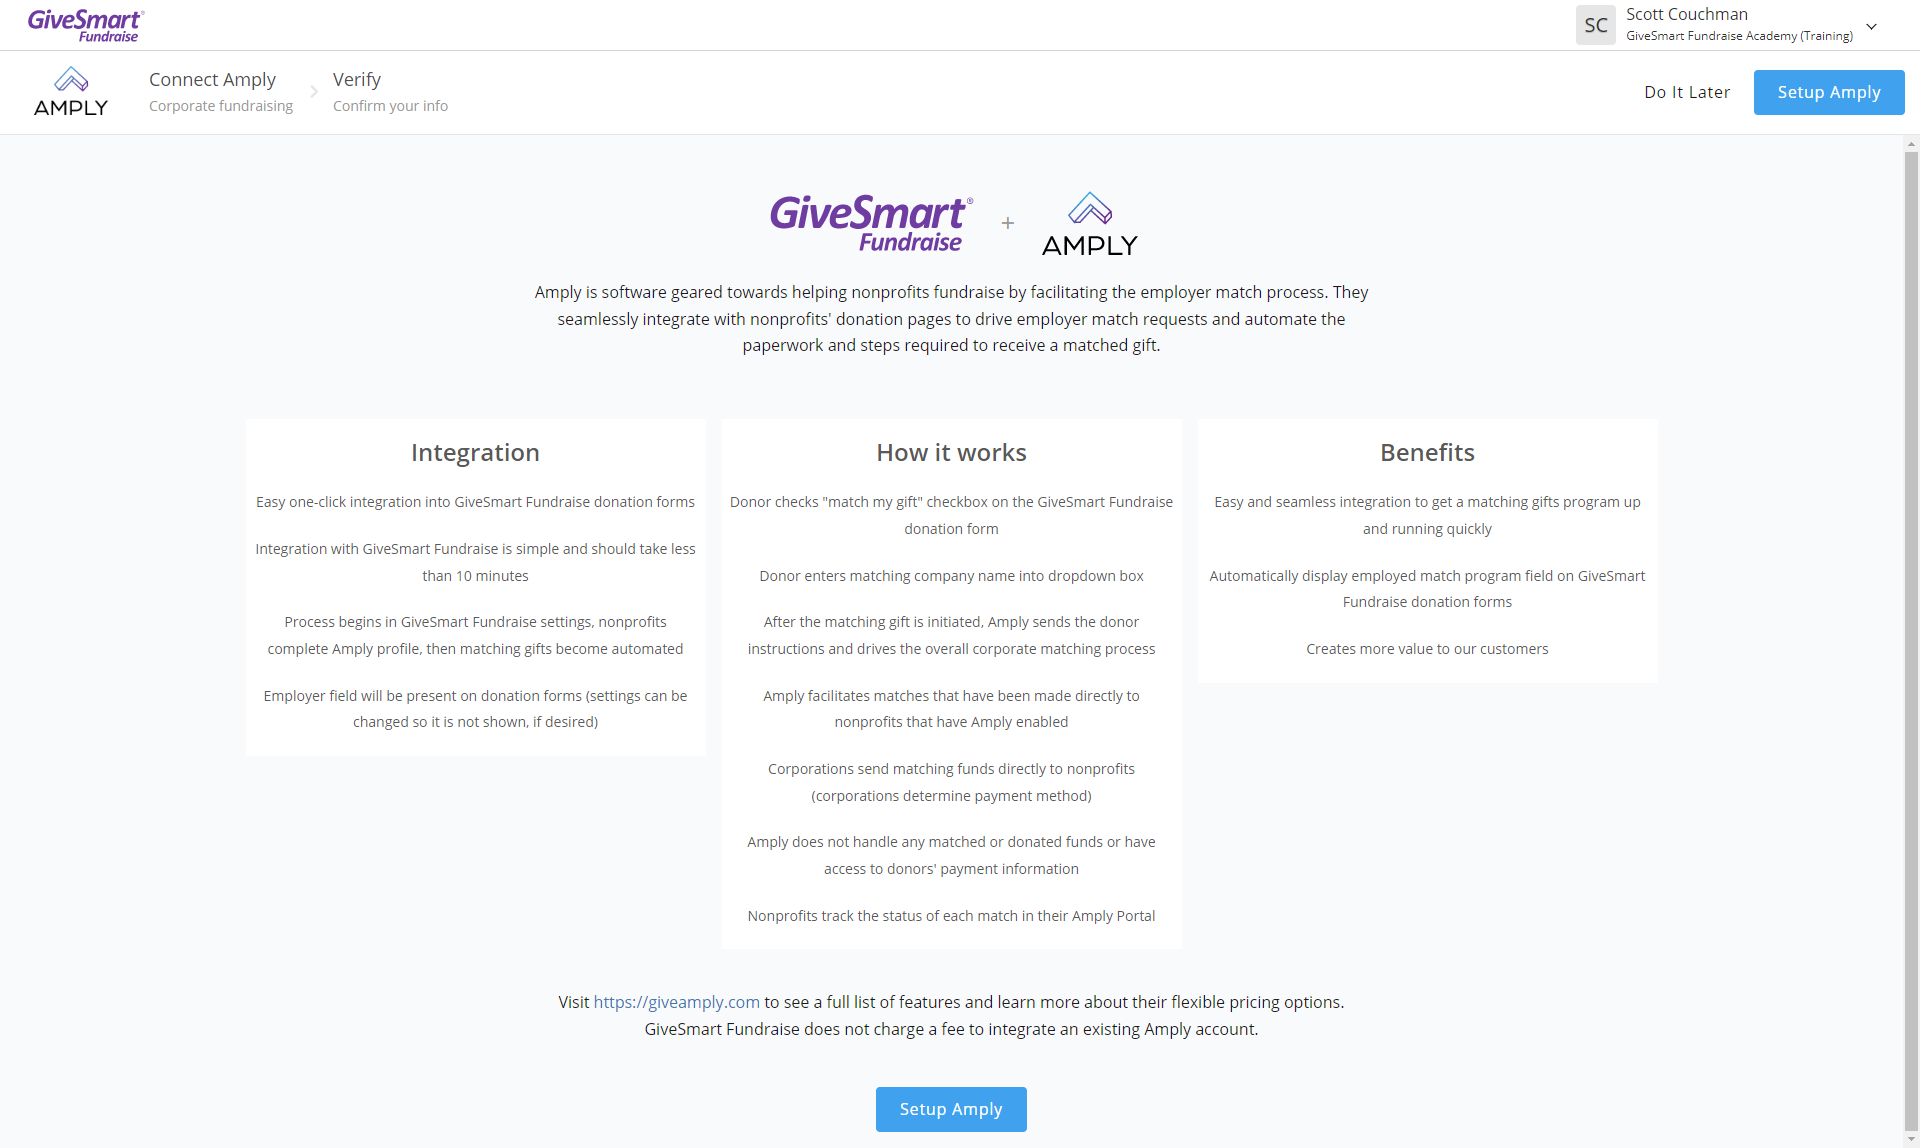 GiveSmart Fundraise - Amply Set Up Page